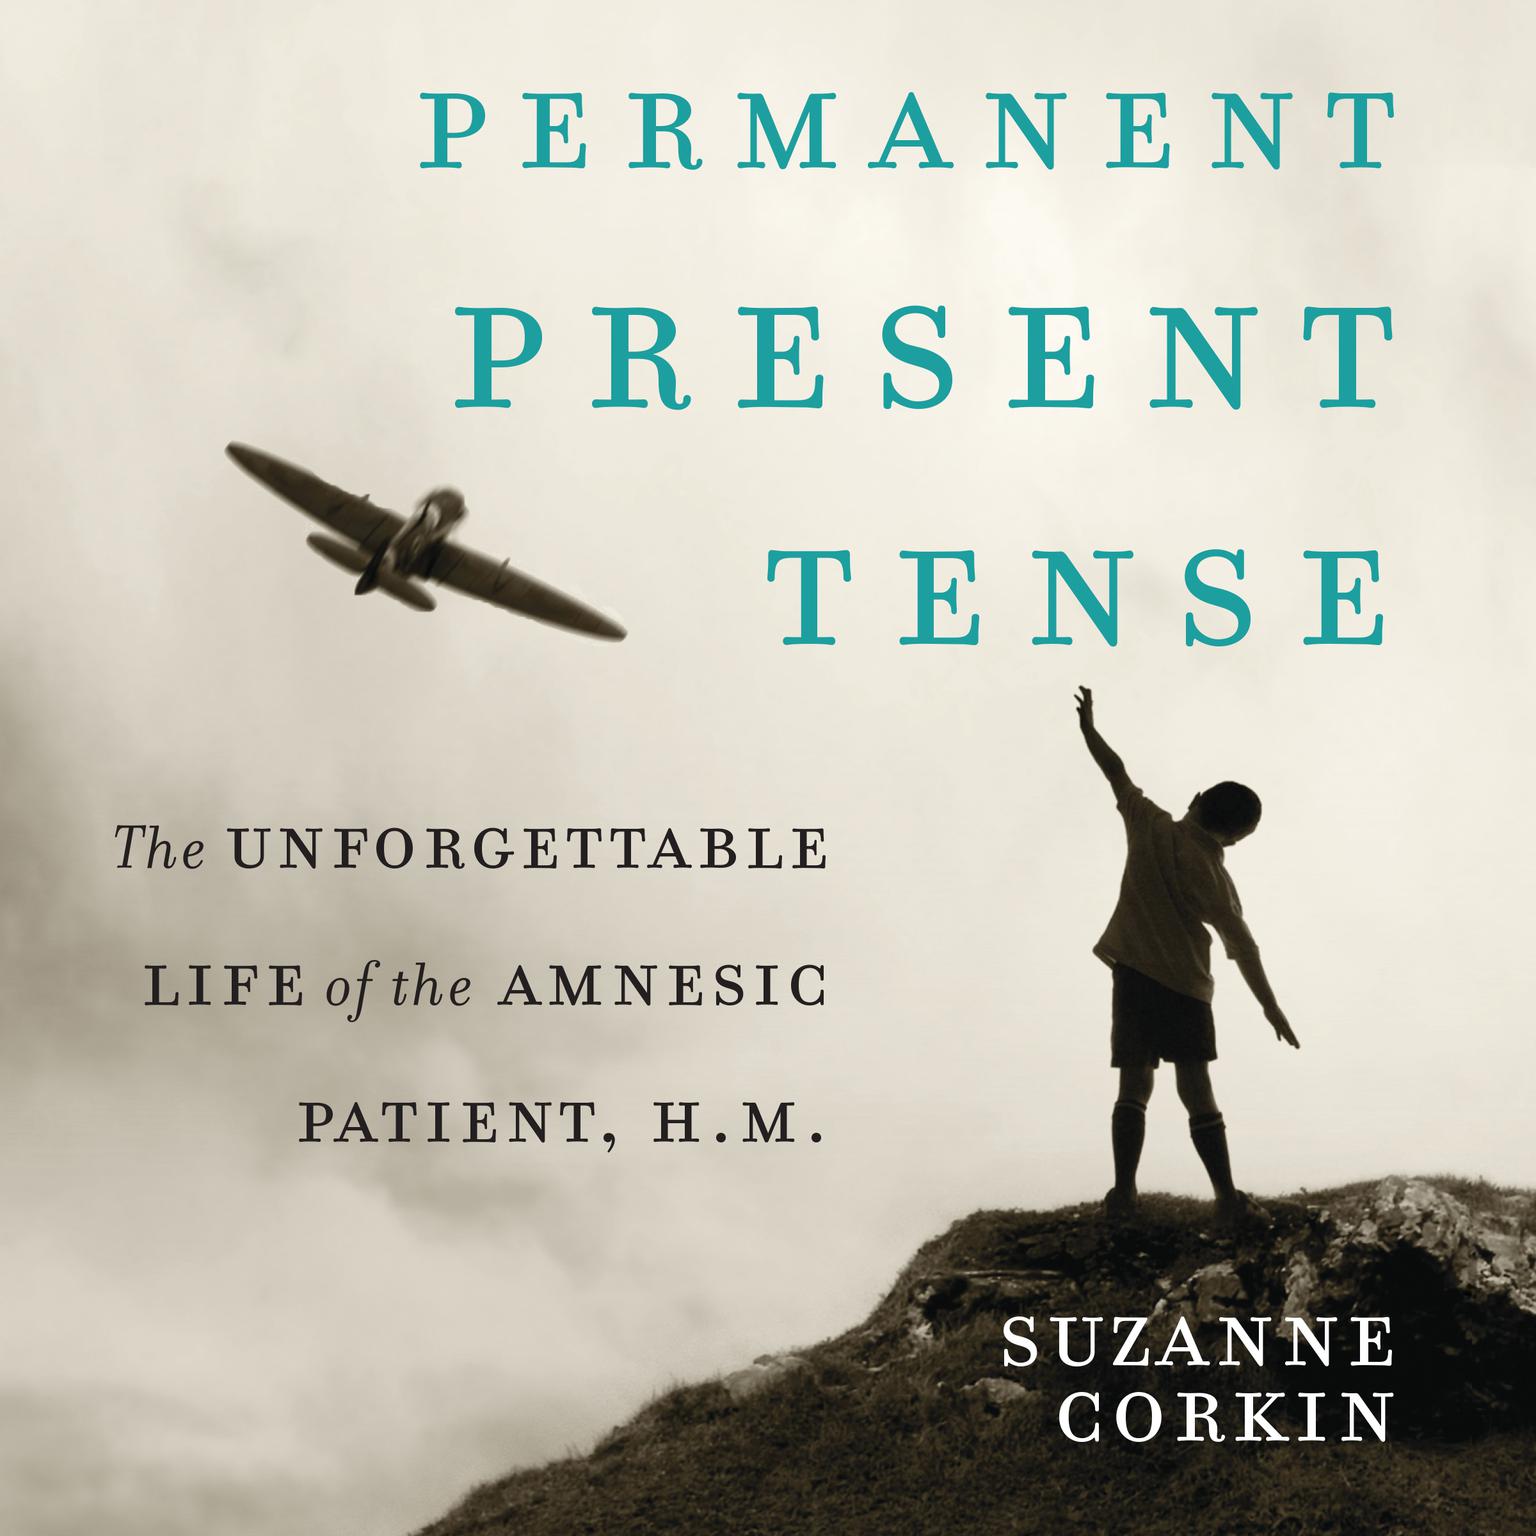 Permanent Present Tense: The Unforgettable Life of the Amnesiac Patient, H. M. Audiobook, by Suzanne Corkin